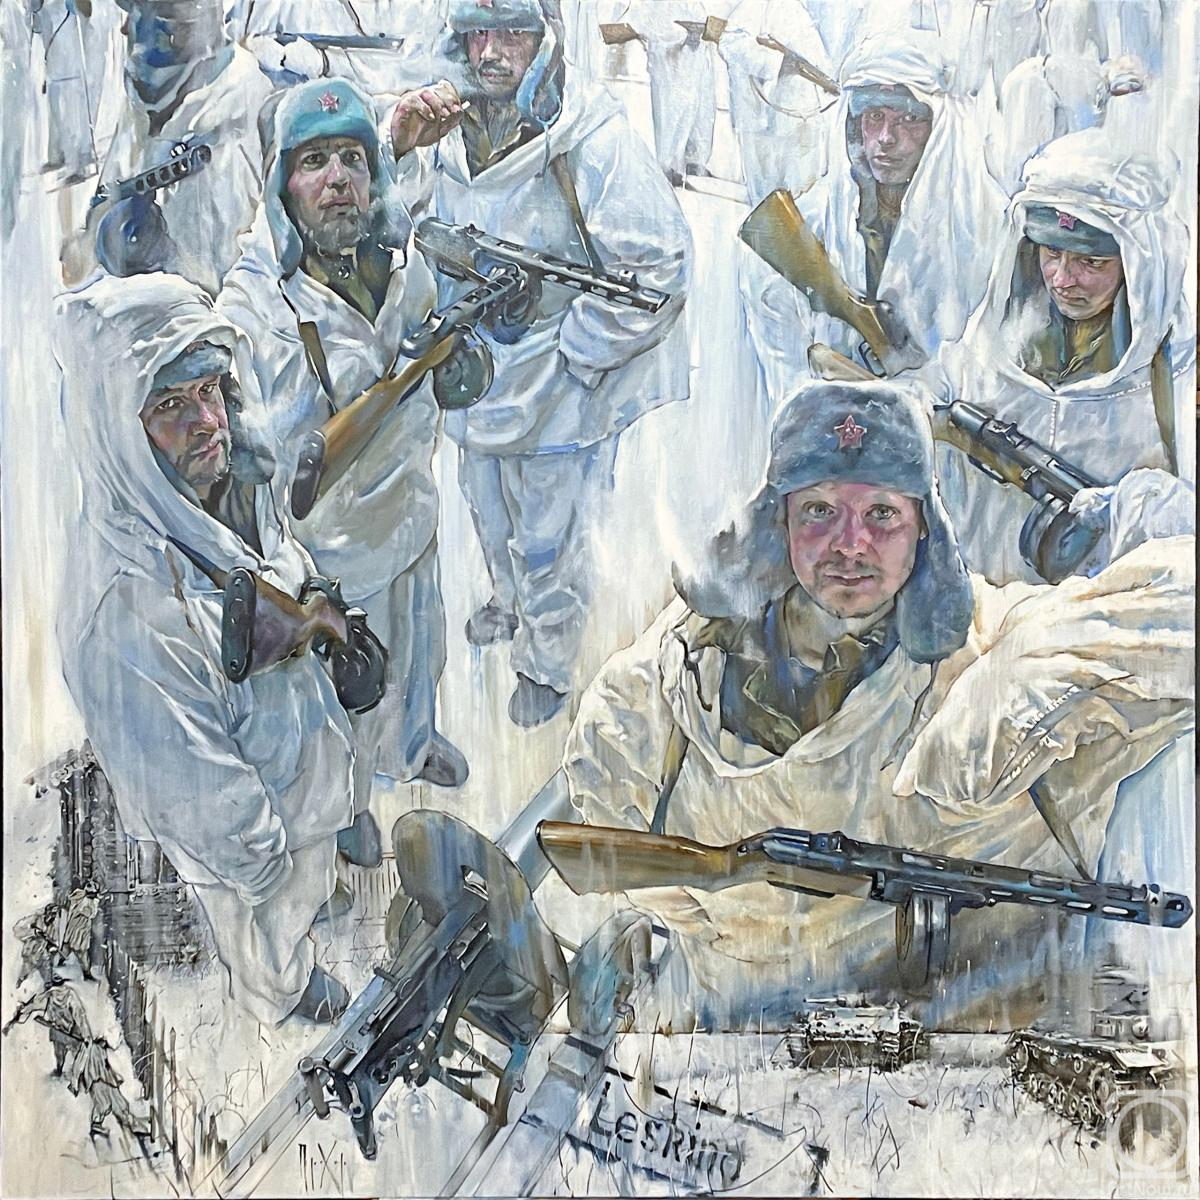 Vechkanov Prokhor. Dedicated to the soldiers of the separate ski battalion of the 29th Guards Rifle Division, their feat in the battle for the village of Leskino in February 1943